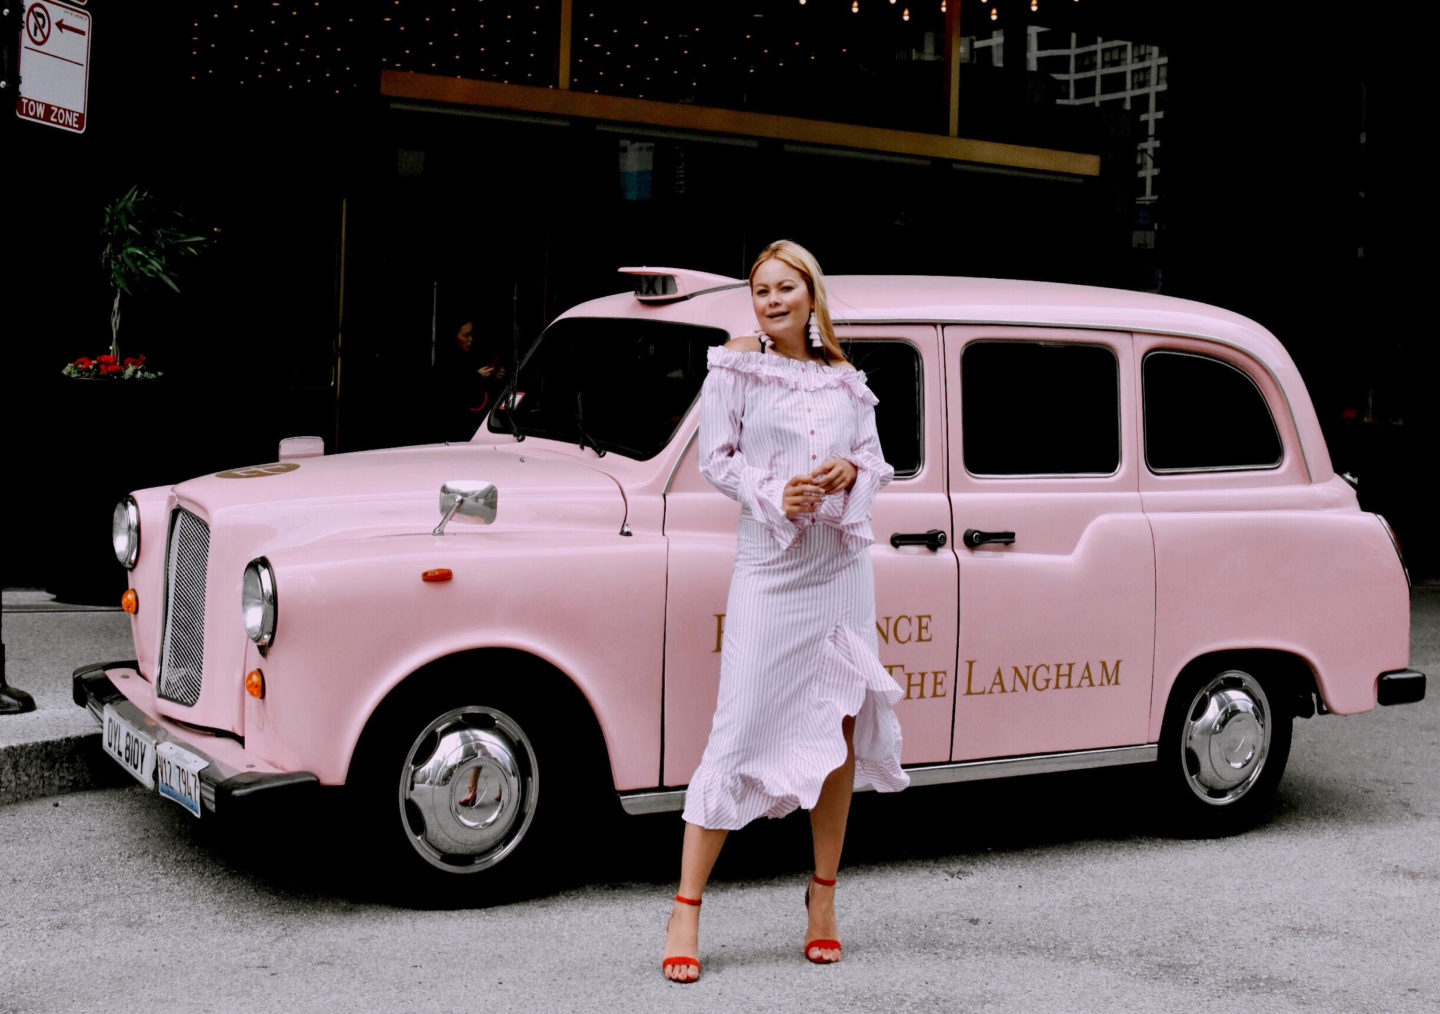  the-langham-hotel-pink-dress-car-chicago-blog-whatwouldvwear